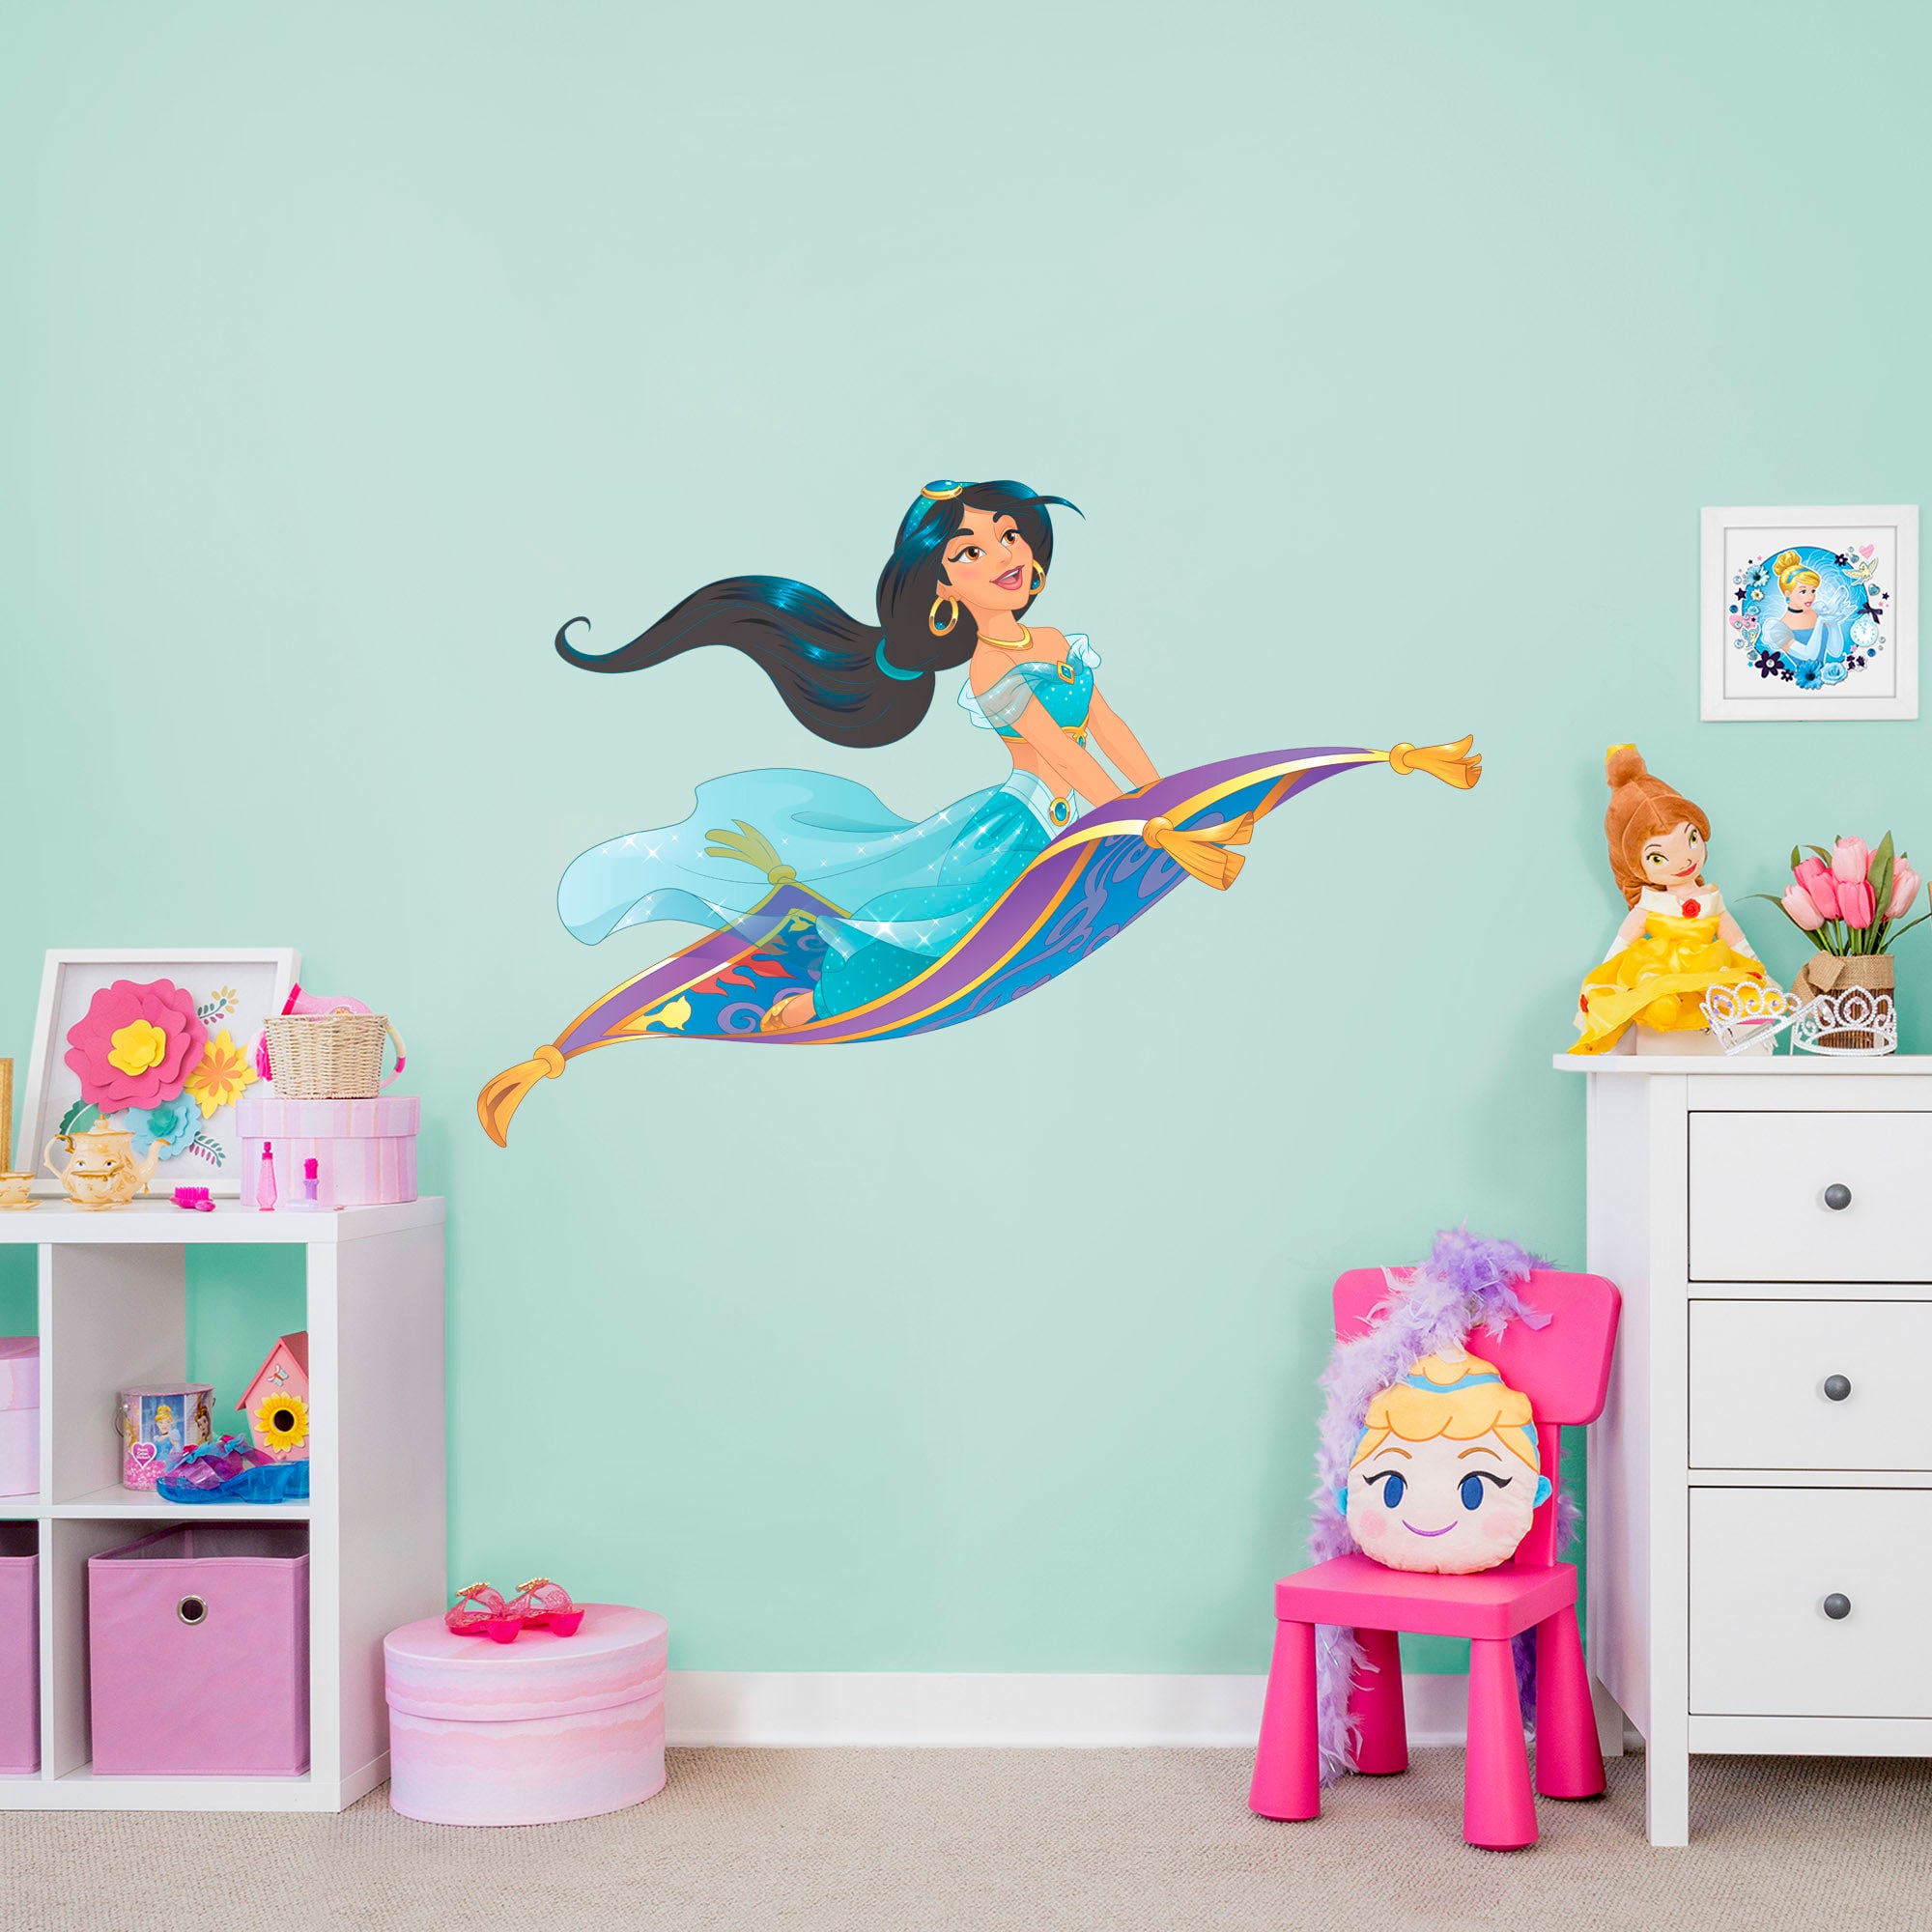 Jasmine: Flying Carpet Ride - Officially Licensed Disney Removable Wall Decal Life-Size Character + 2 Decals (77"W x 51"H) by Fa